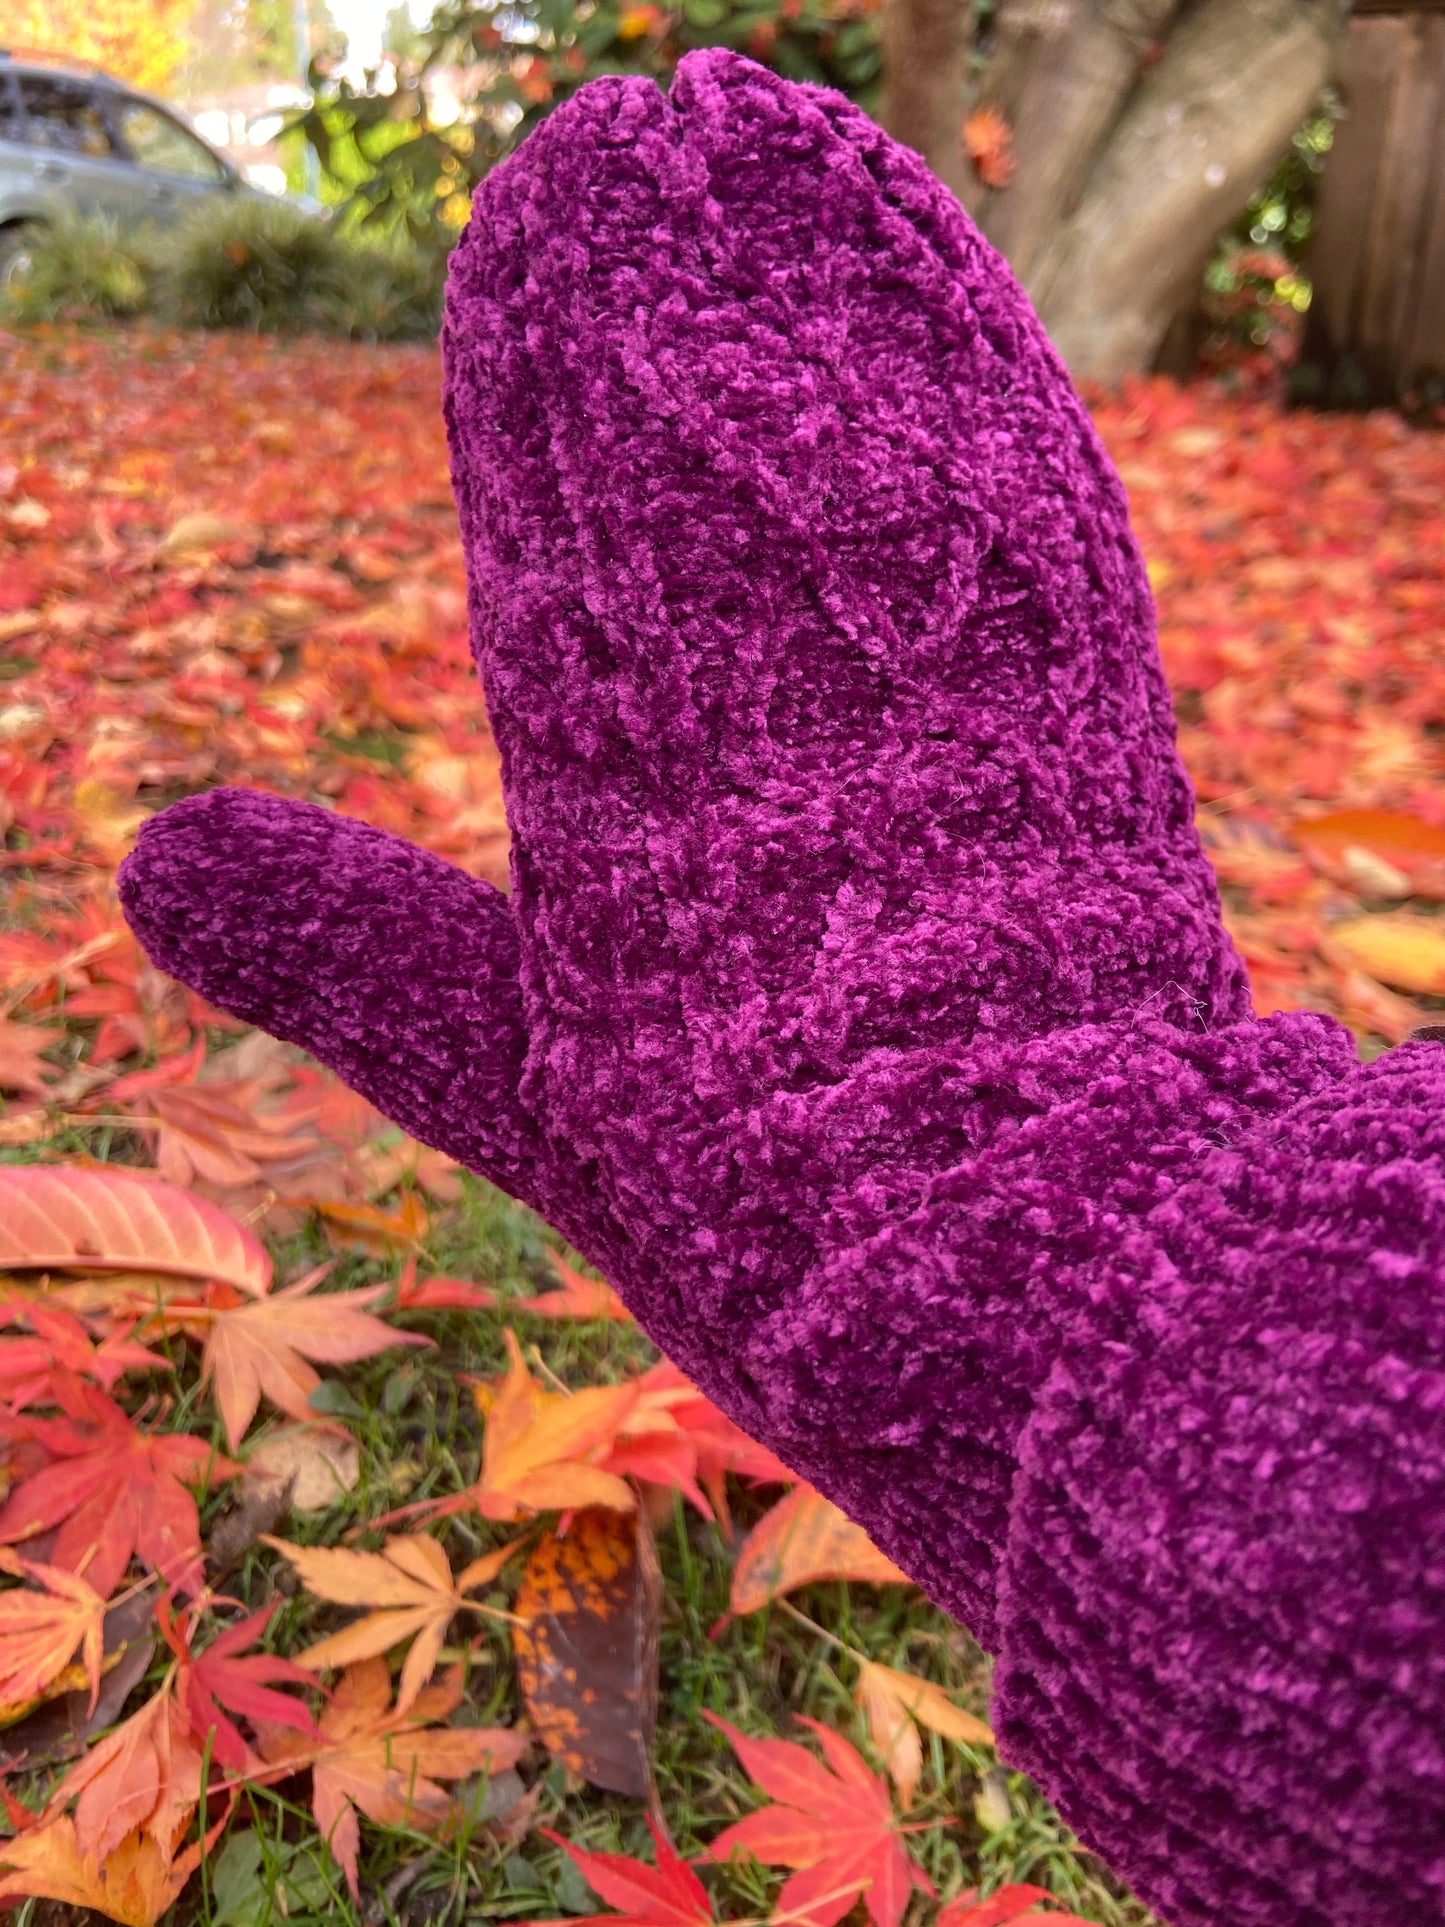 Winter Mittens in Dark Purple Chenille Cable Knit - Adult Warm Gloves